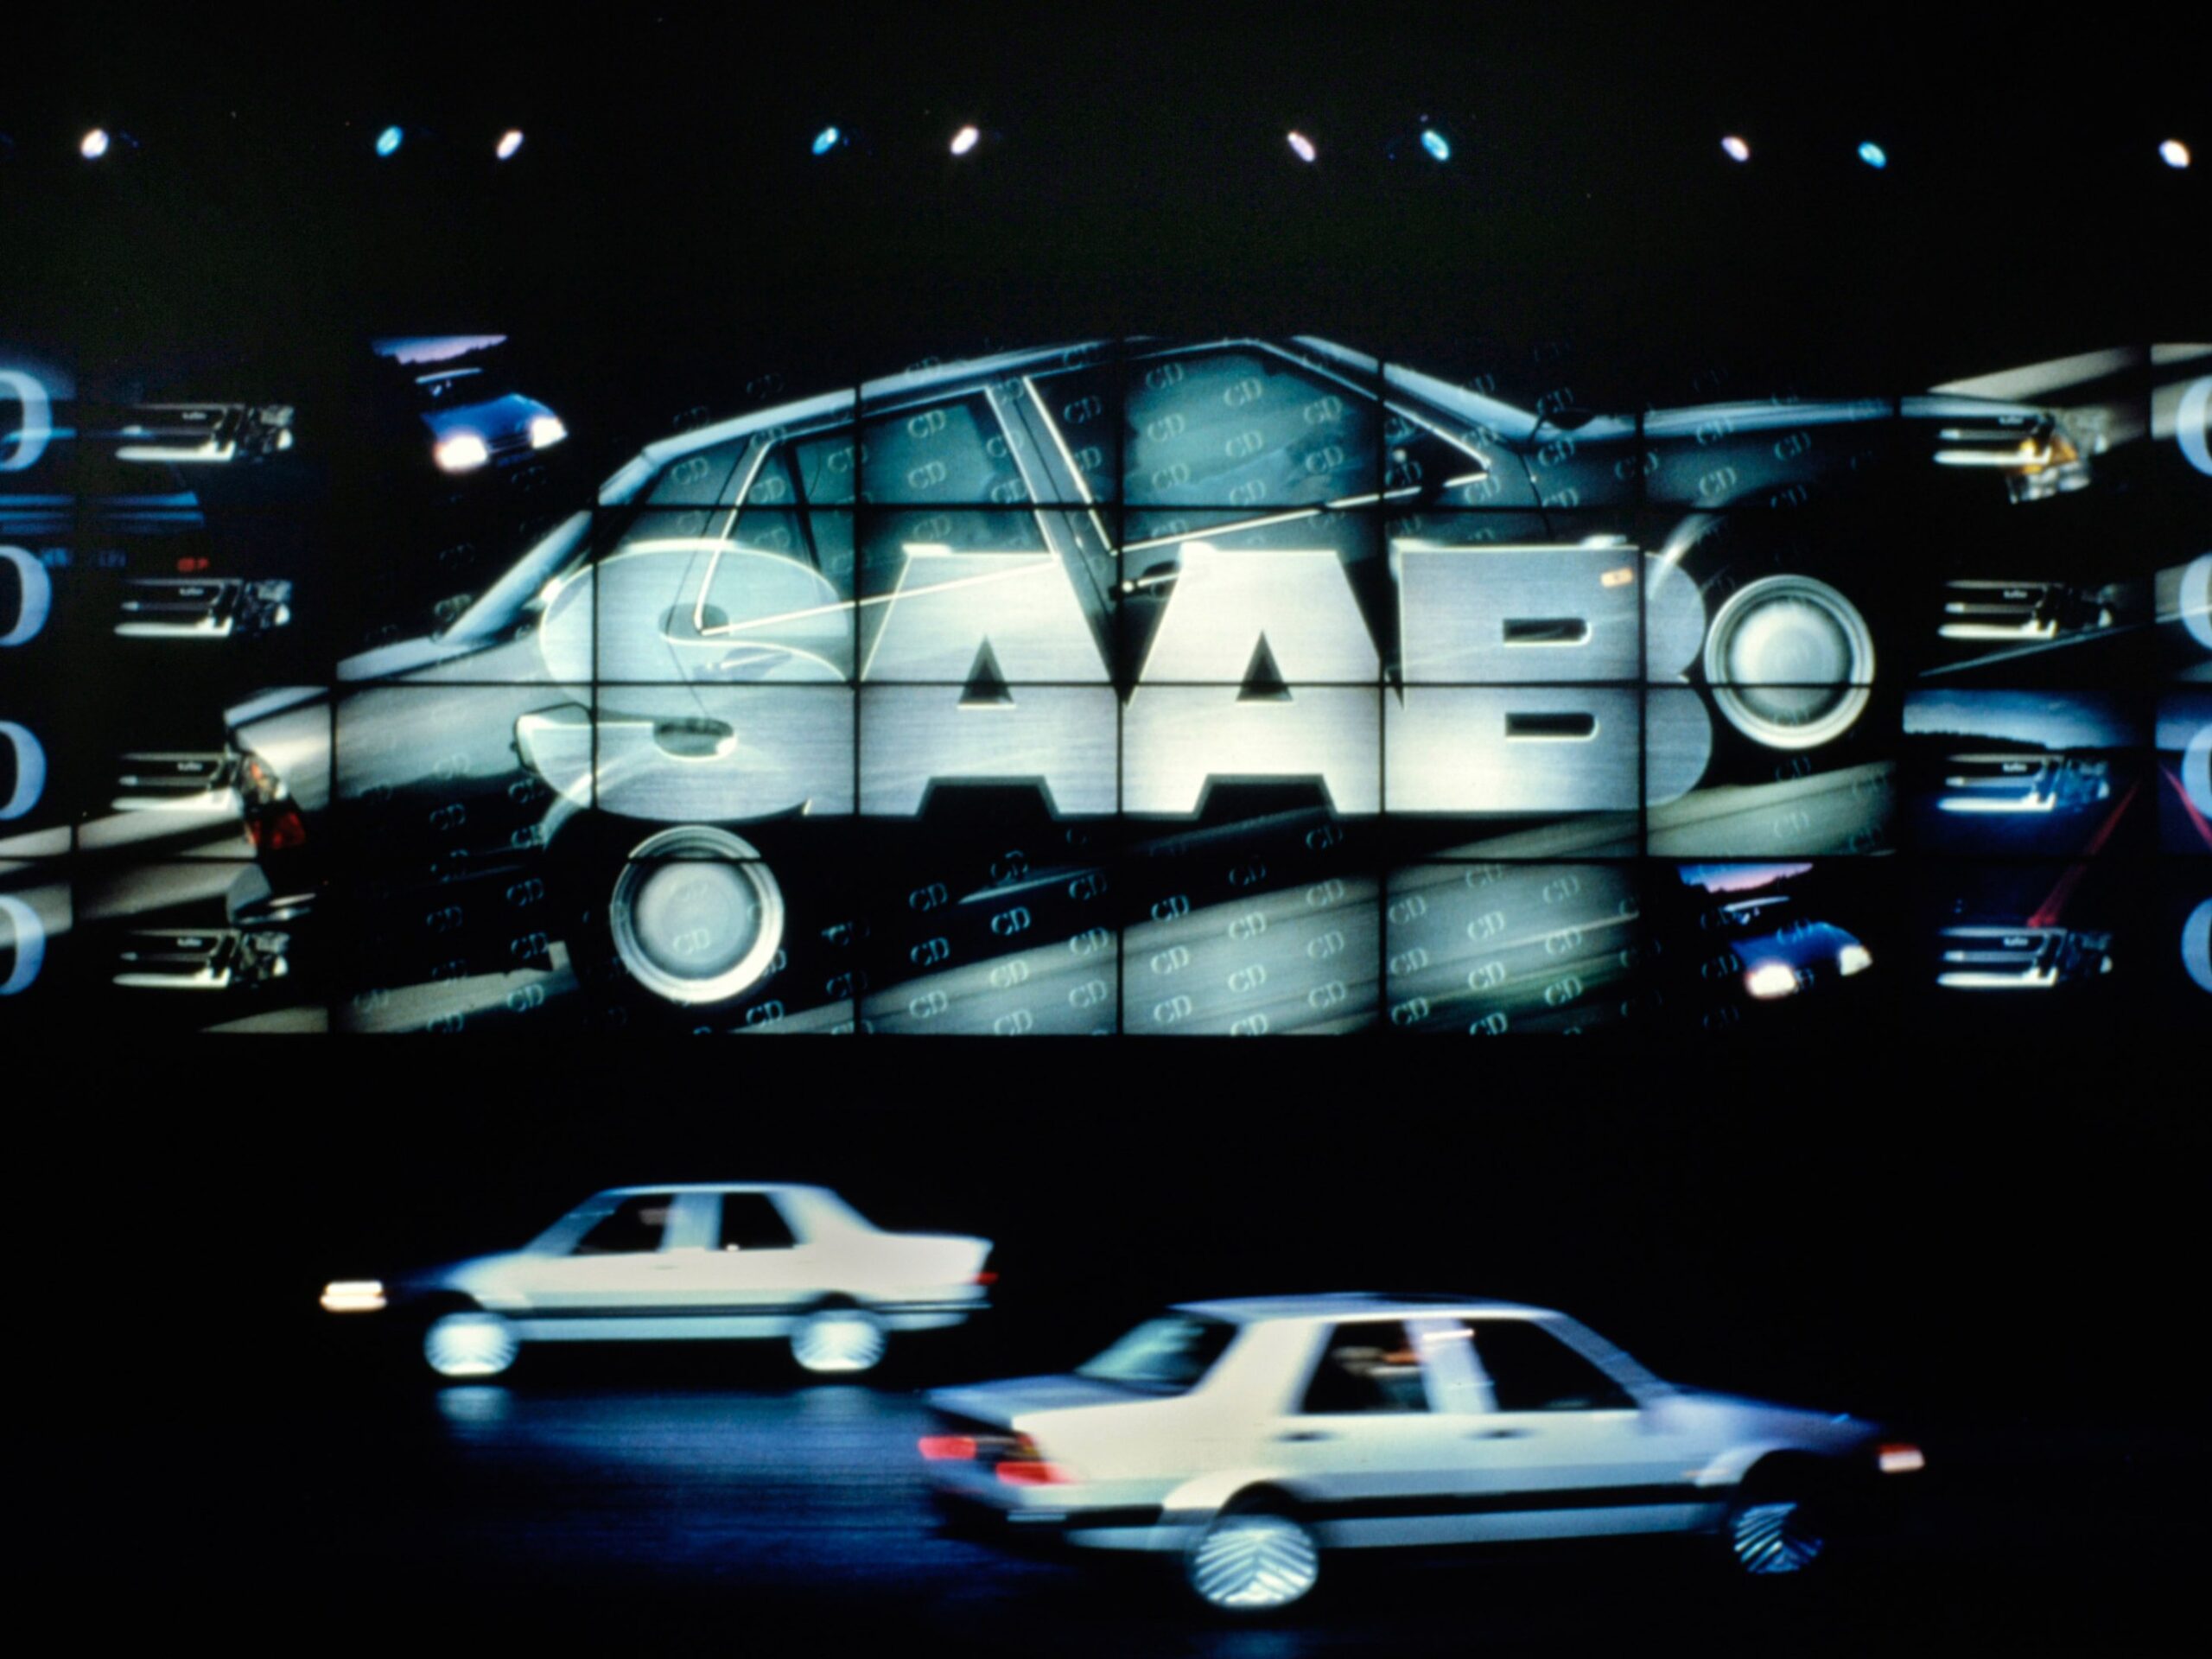 the Saab logo presented on an Image Wall while Saab cars drive on the stage